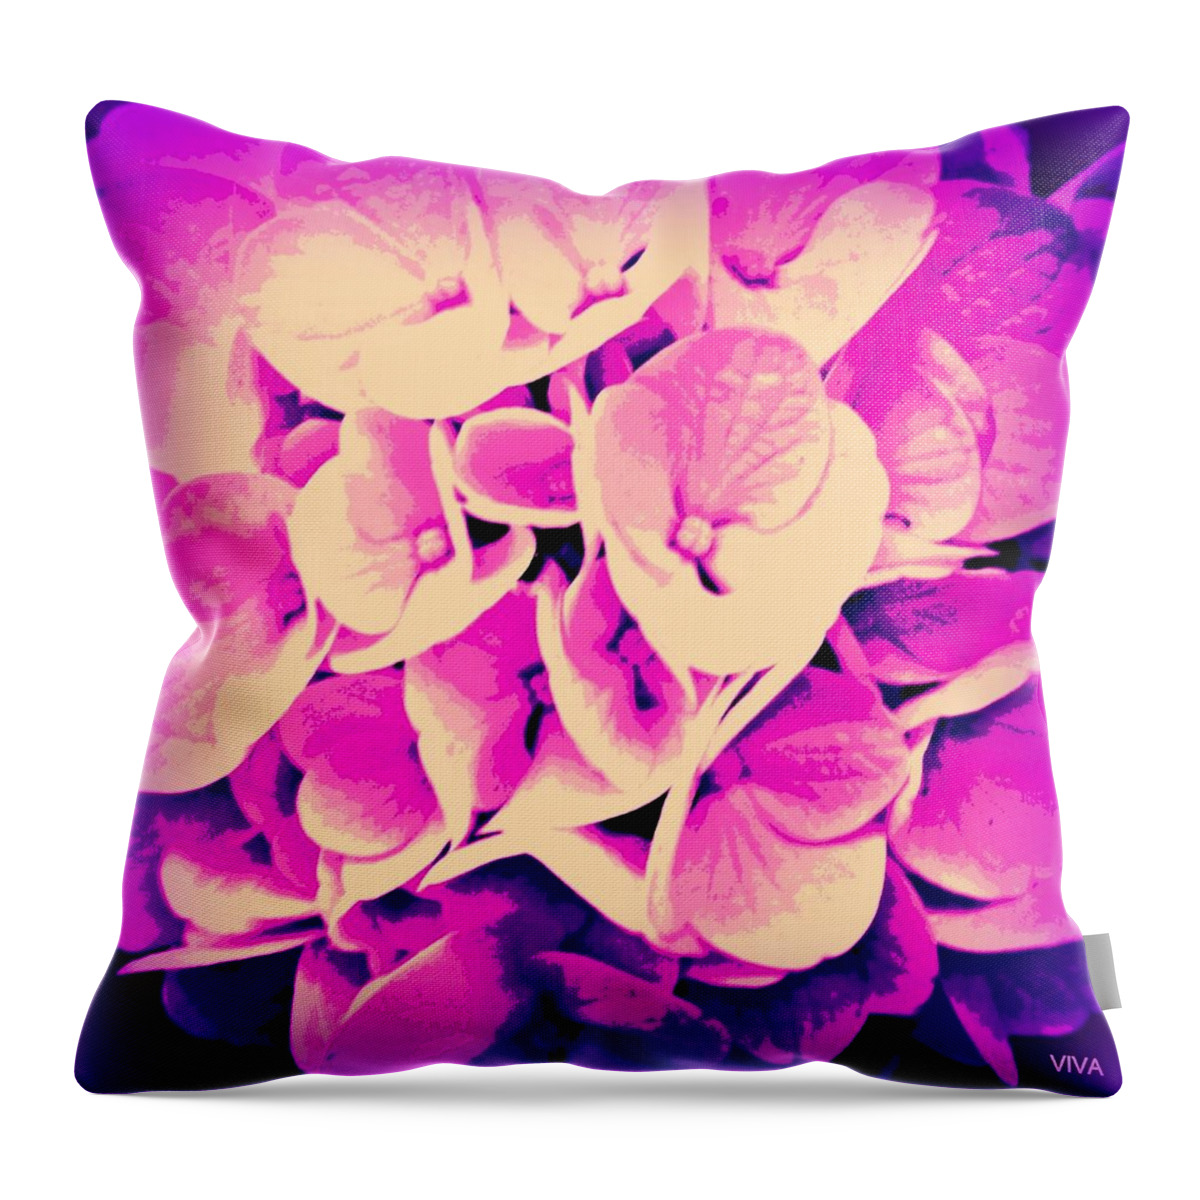 Hydrangea Throw Pillow featuring the photograph Hydrangea Purple Glory Moderne by VIVA Anderson